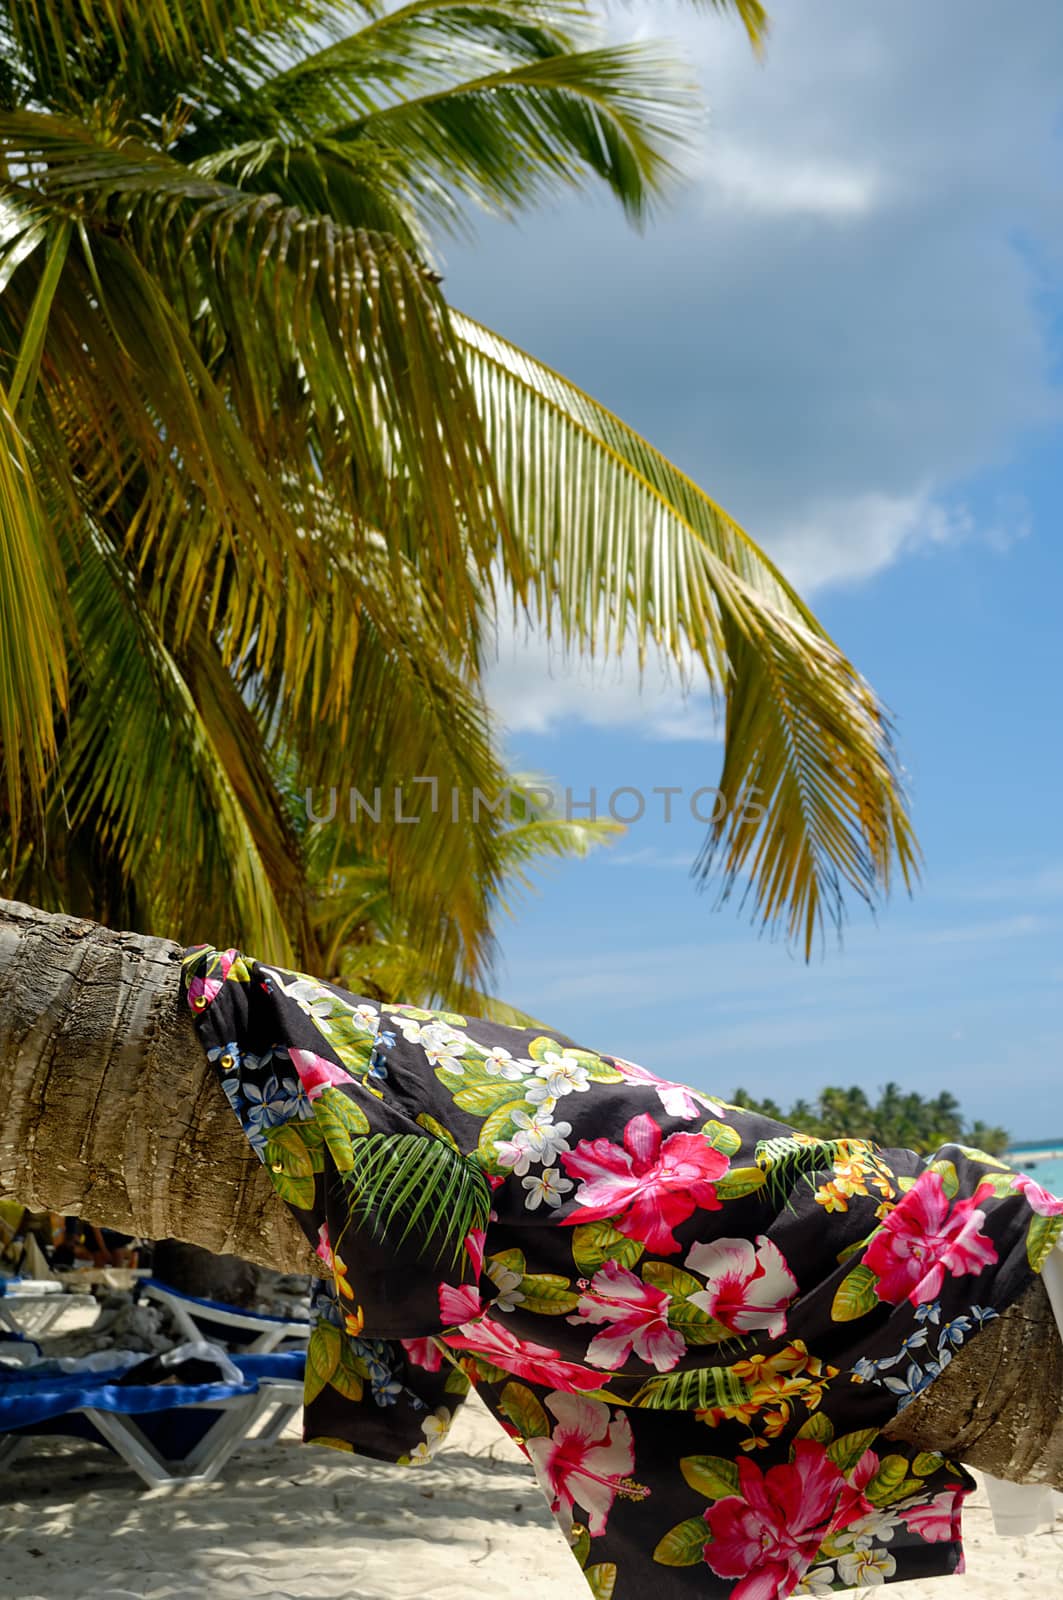 Clothing drying on palm by cfoto